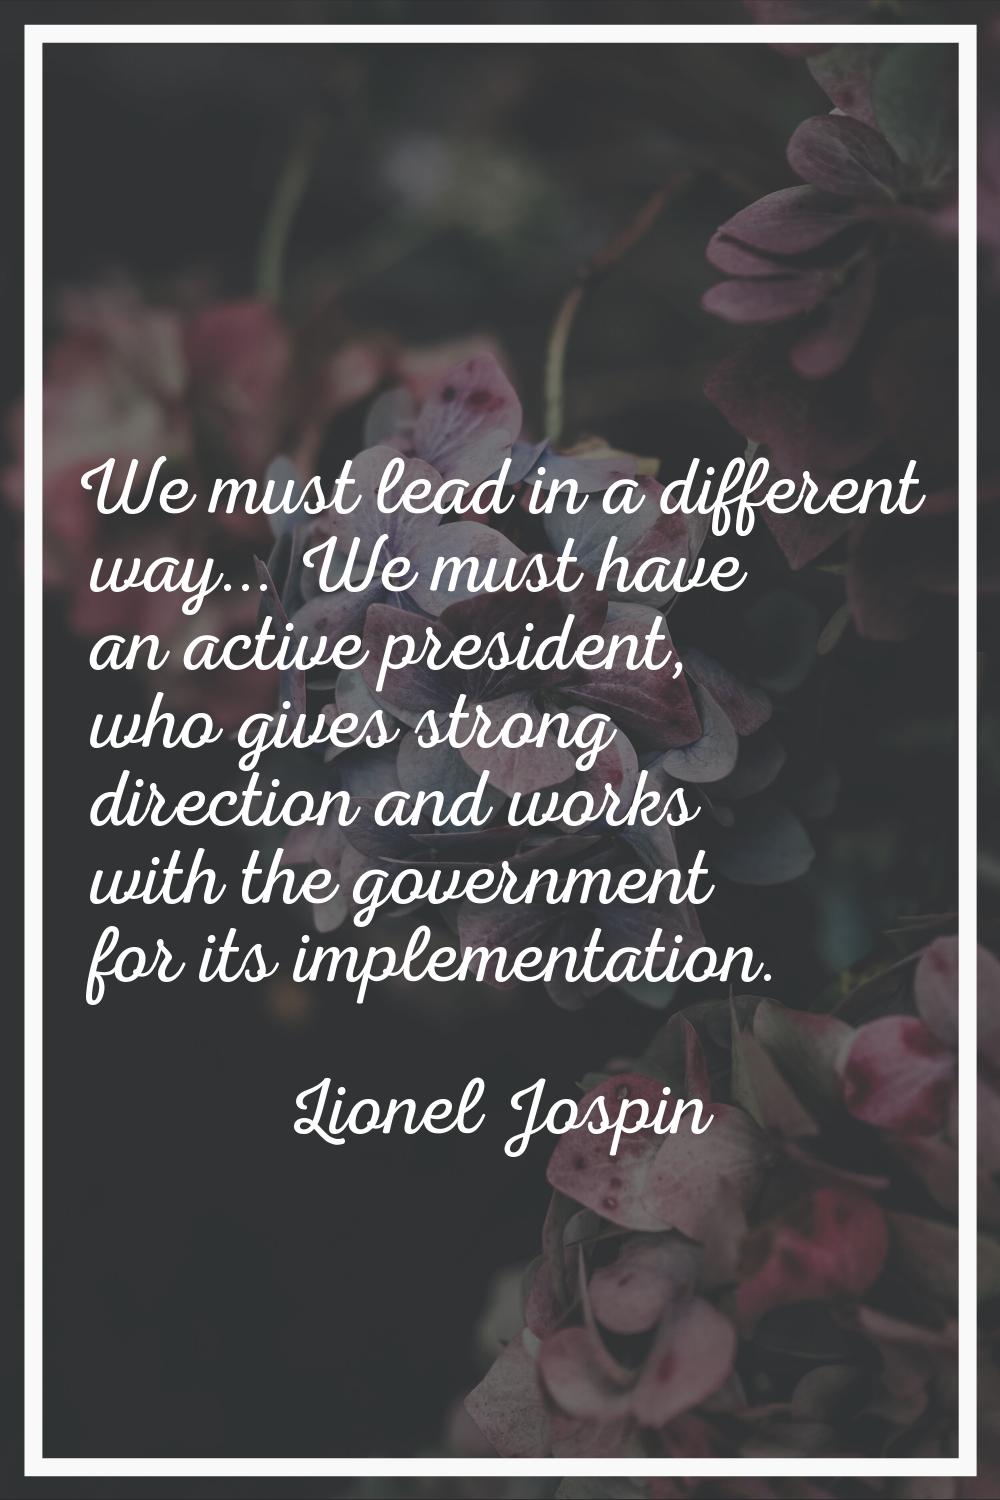 We must lead in a different way... We must have an active president, who gives strong direction and